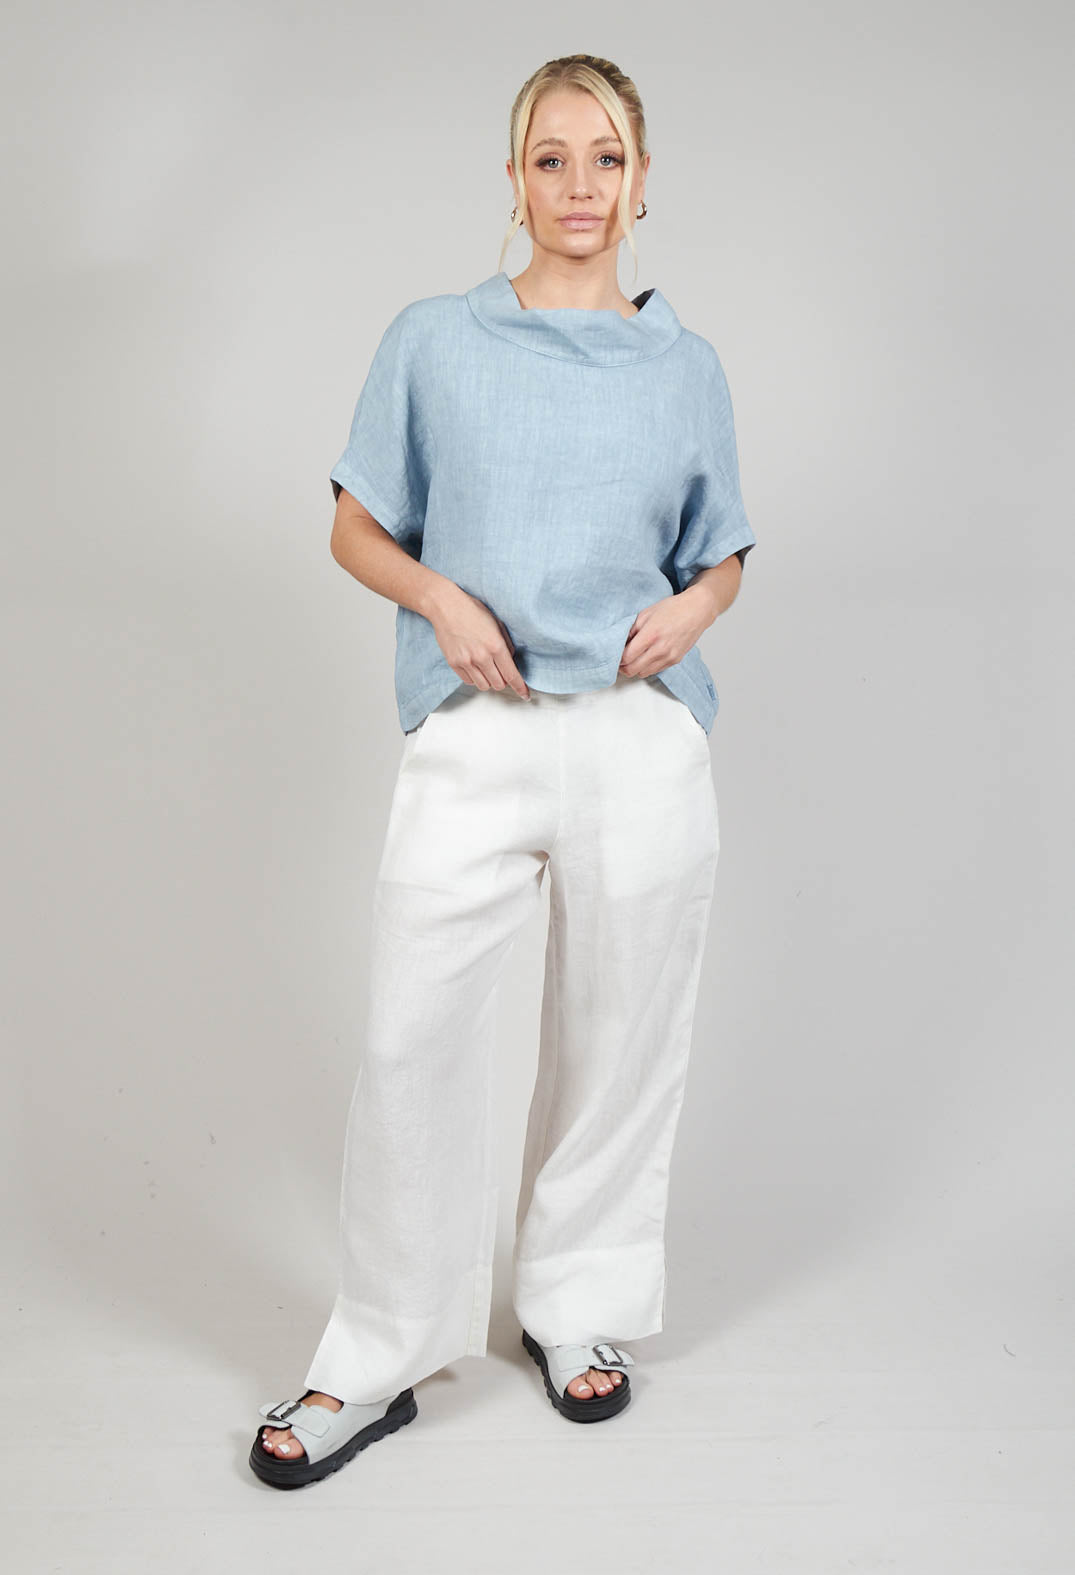 Ido Trousers in Undyed